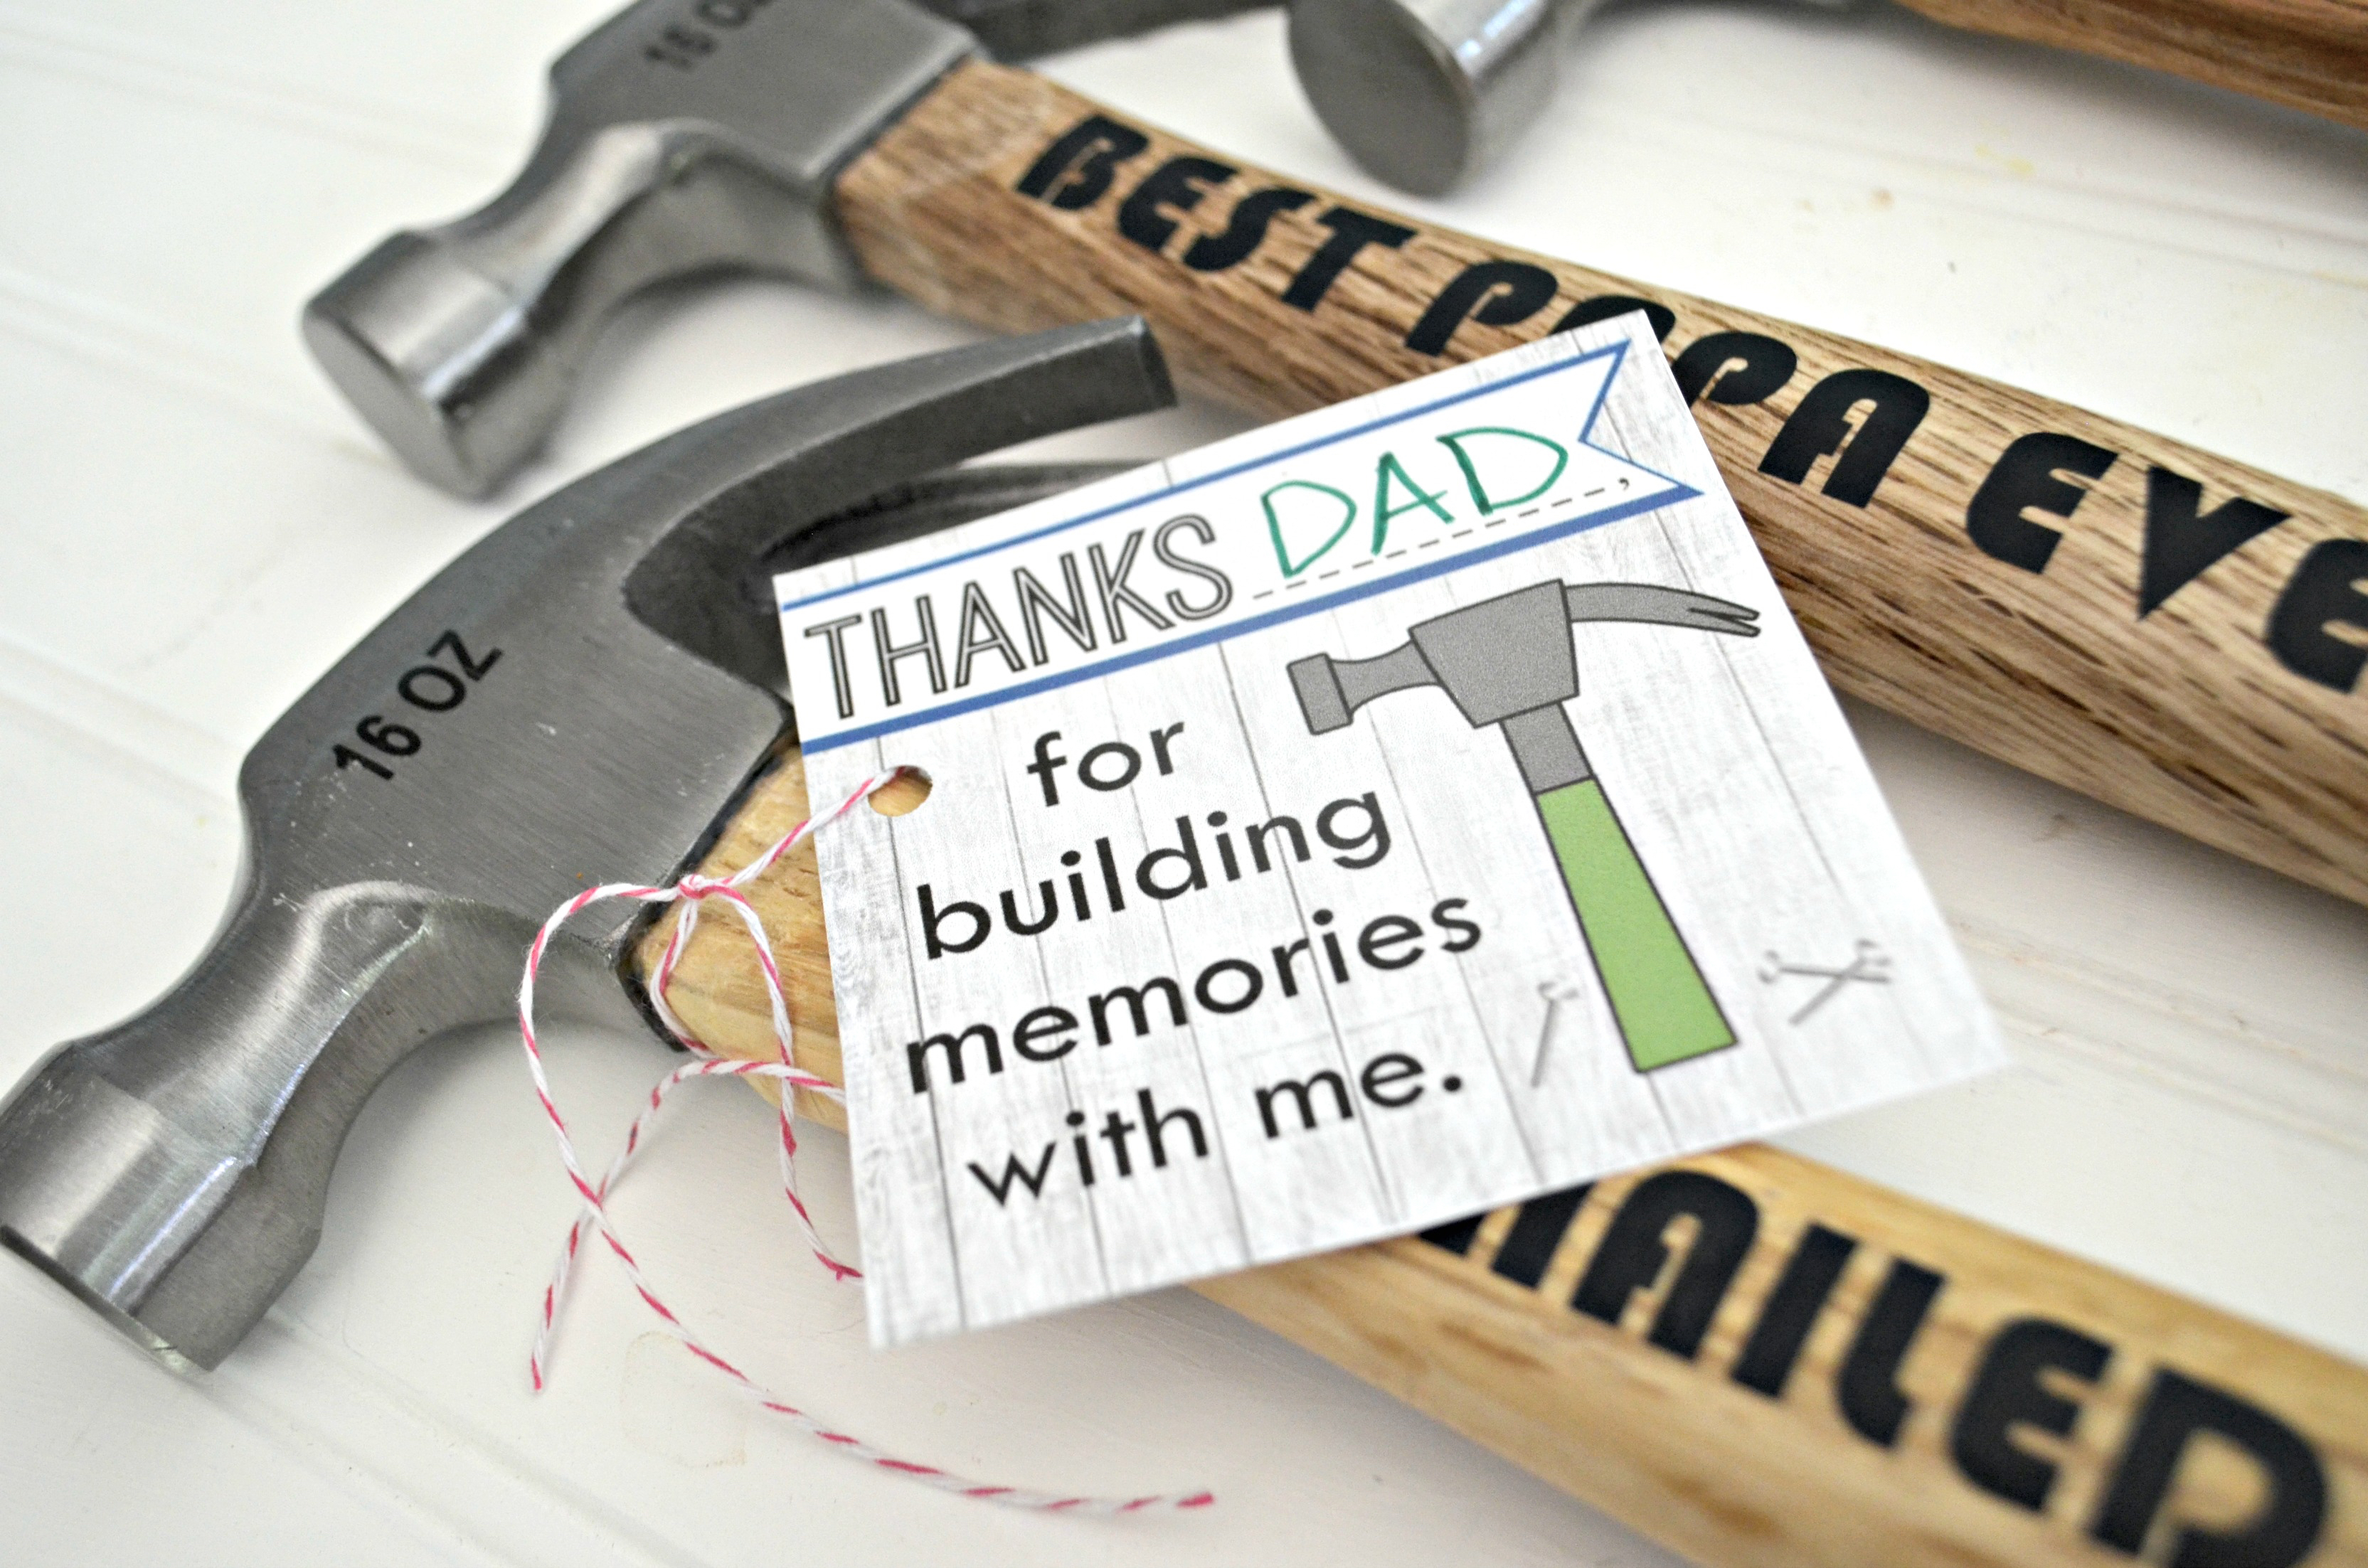 fathers day freebies meals and deals – cute Father's Day hammer craft